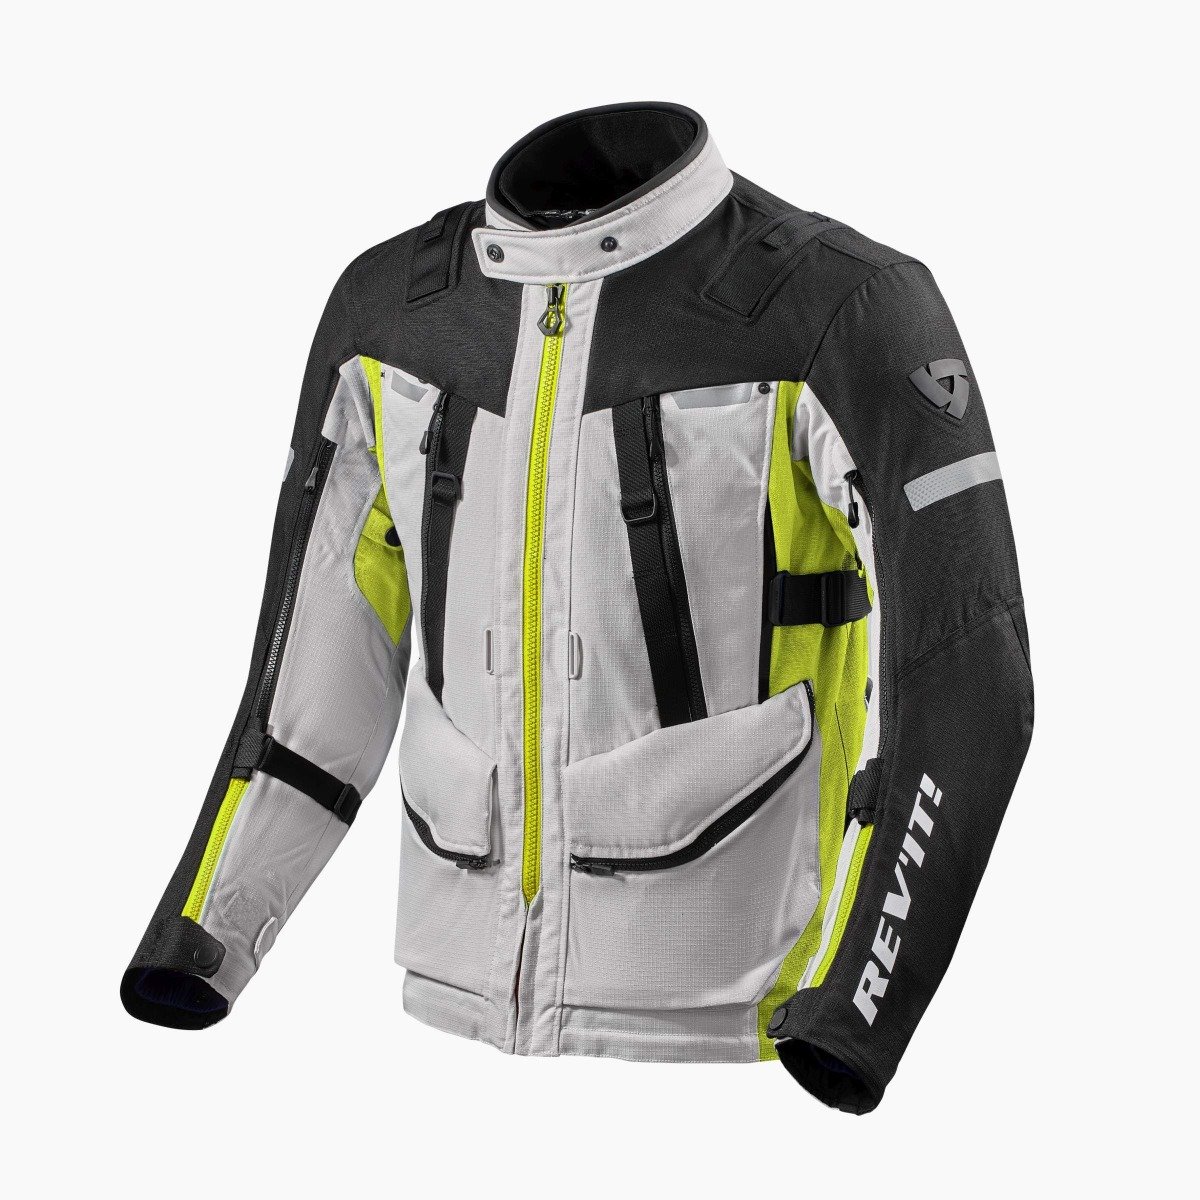 Image of REV'IT! Sand 4 H2O Jacket Silver Neon Yellow Size S ID 8700001311151